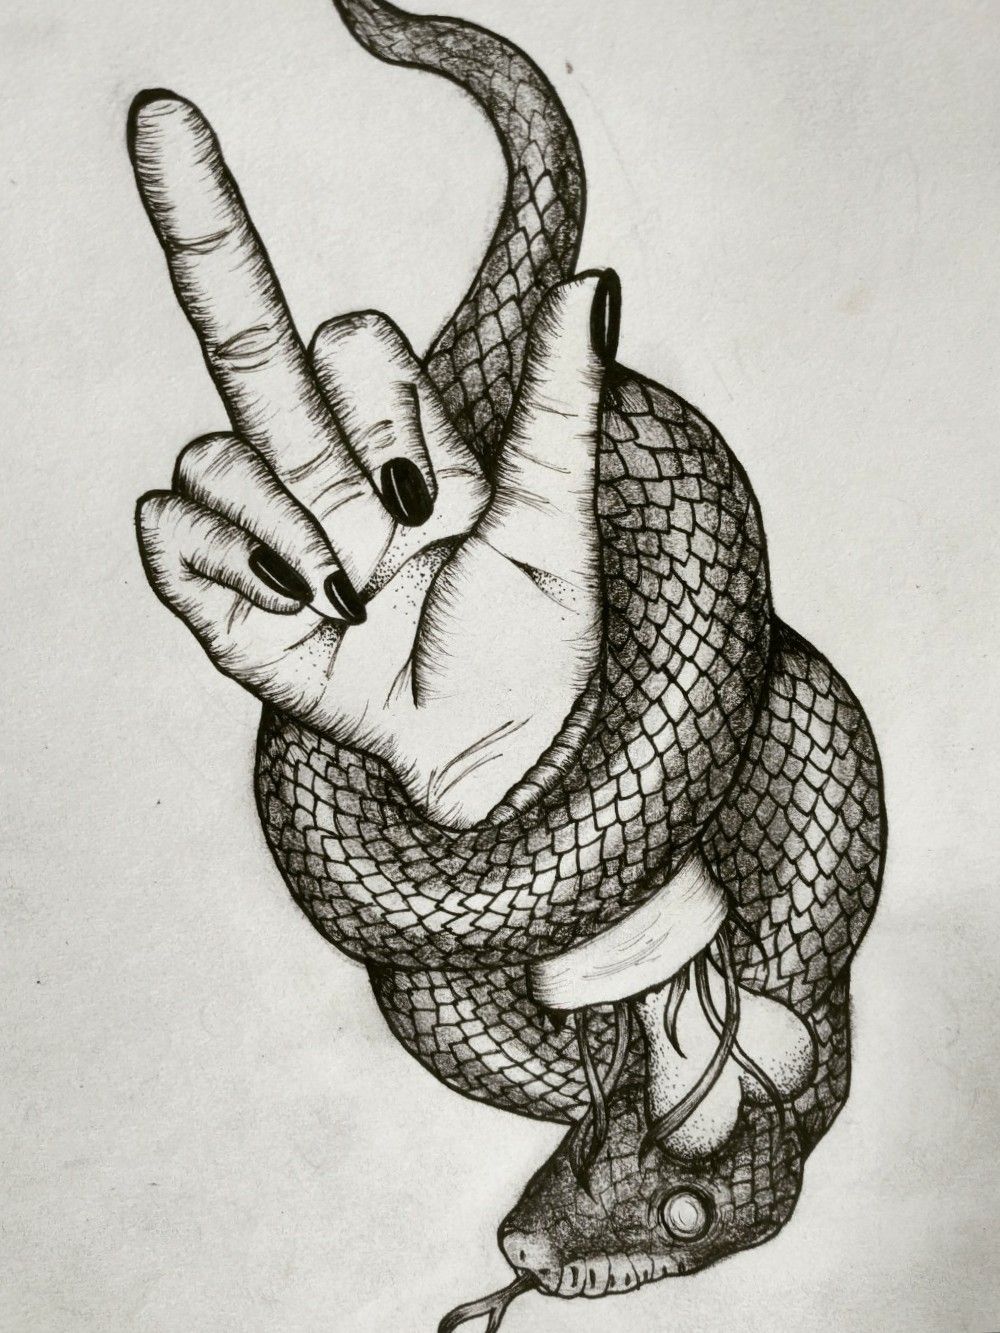 Tattoo snake. Traditional black dot style ink. Isolated illustration.  Traditional Tattoo Old School Tattooing Style Ink. silhouette illustration.  